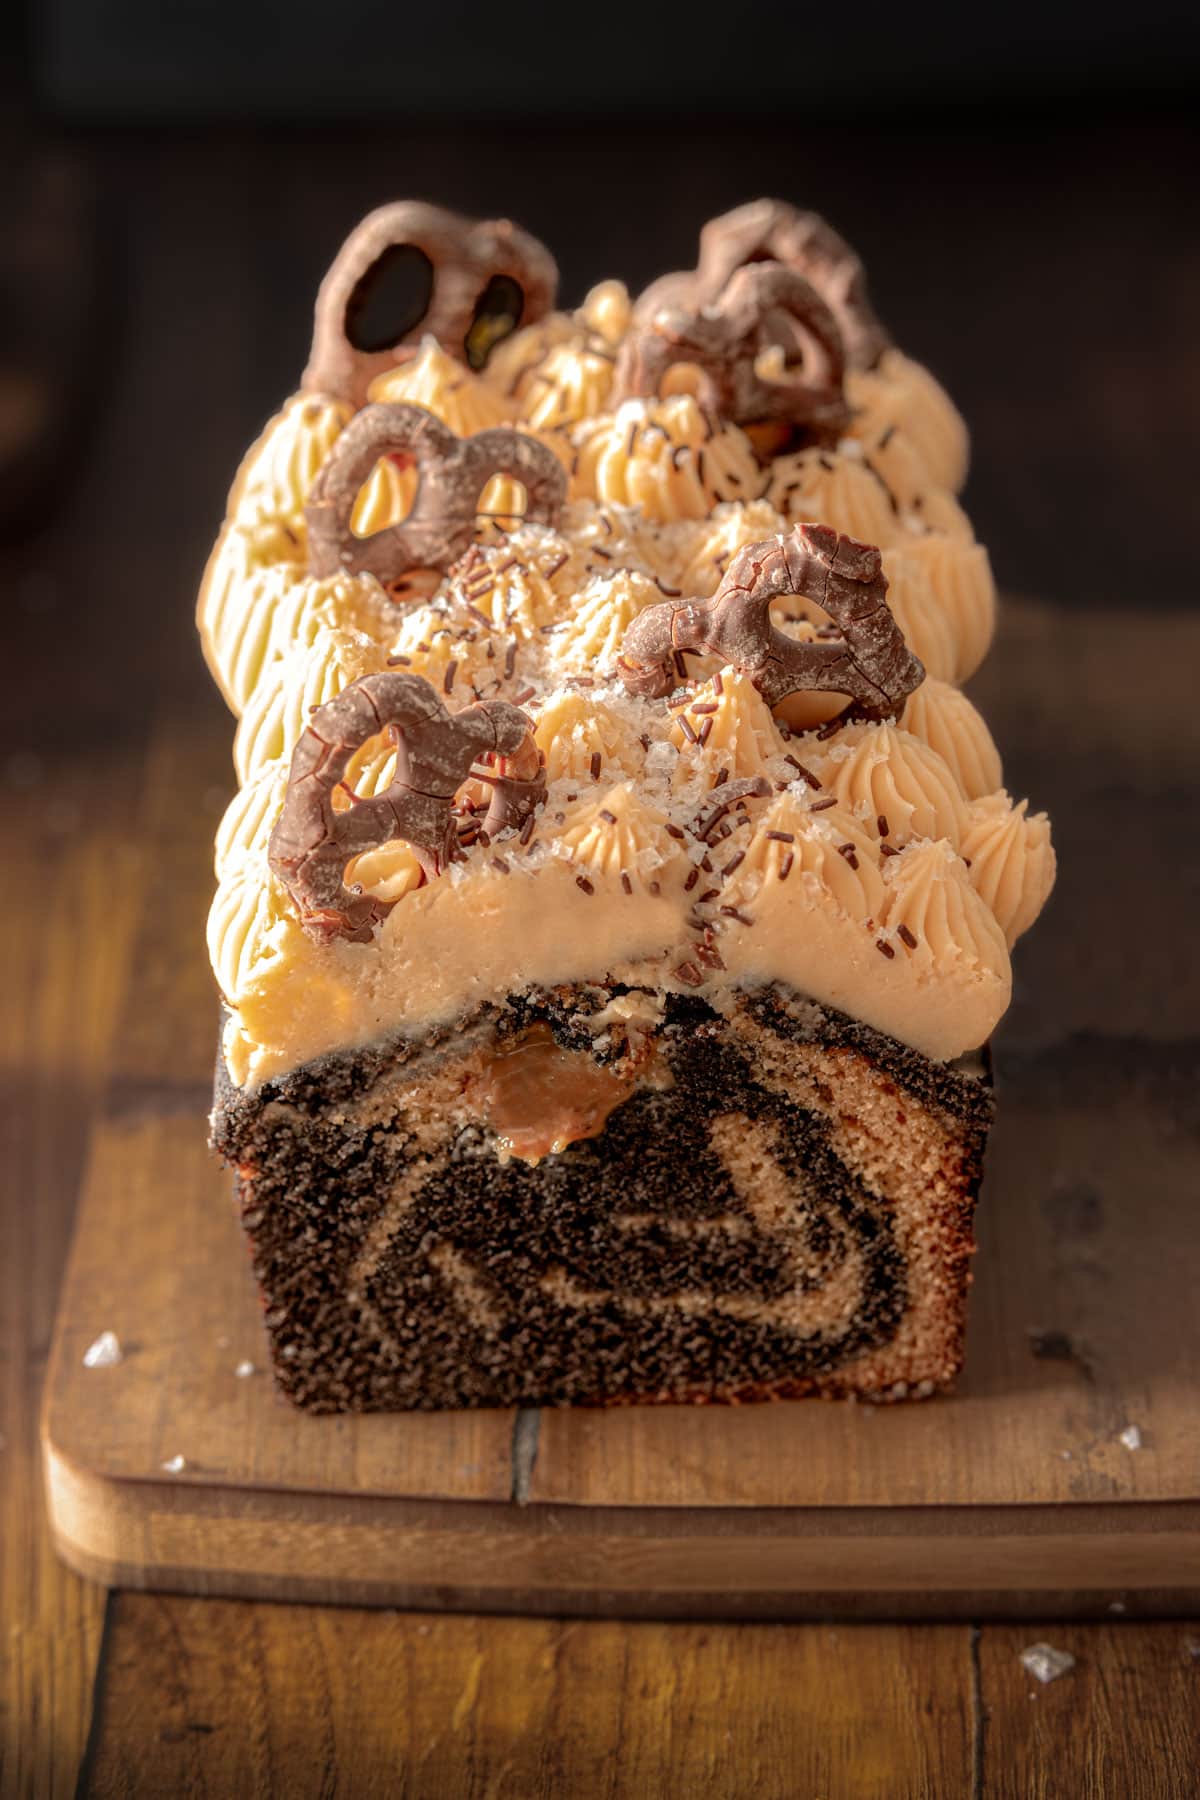 A chocolate caramel loaf cake on a wooden chopping board with the front slice cut off so you can see the marble swirl in the cake batter.